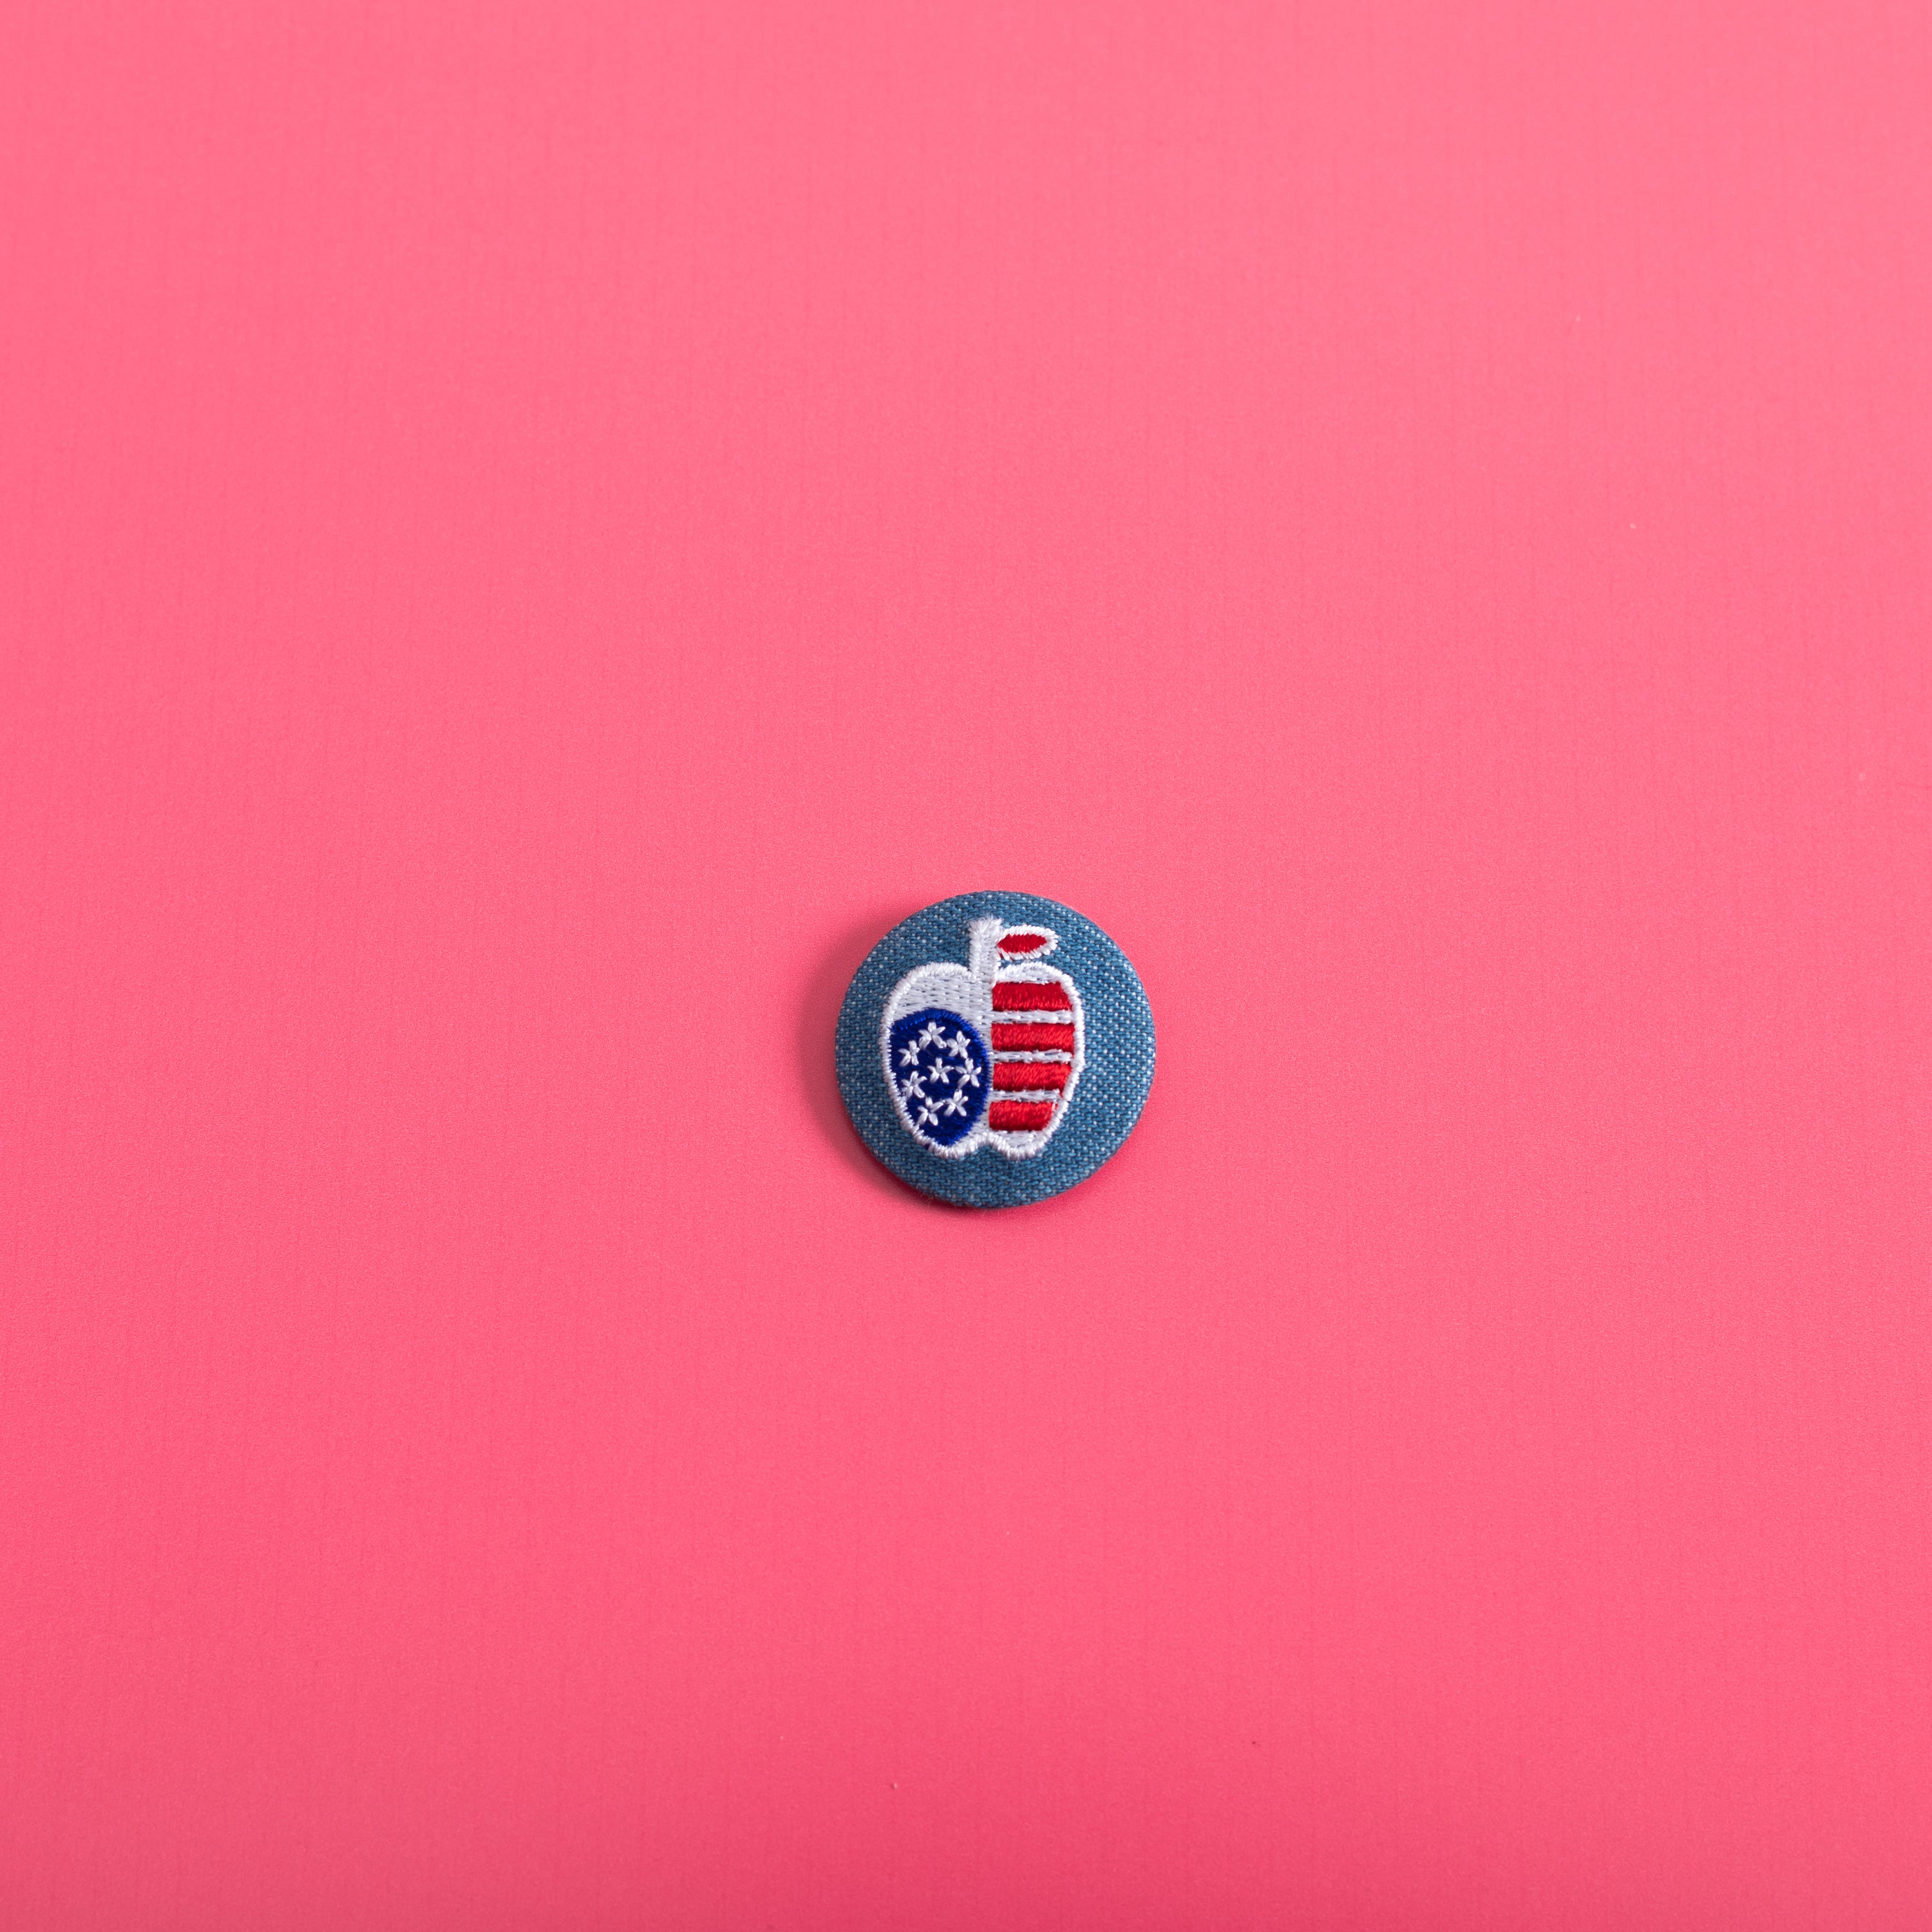 American Pie Button Pin,FlairMindFlowers